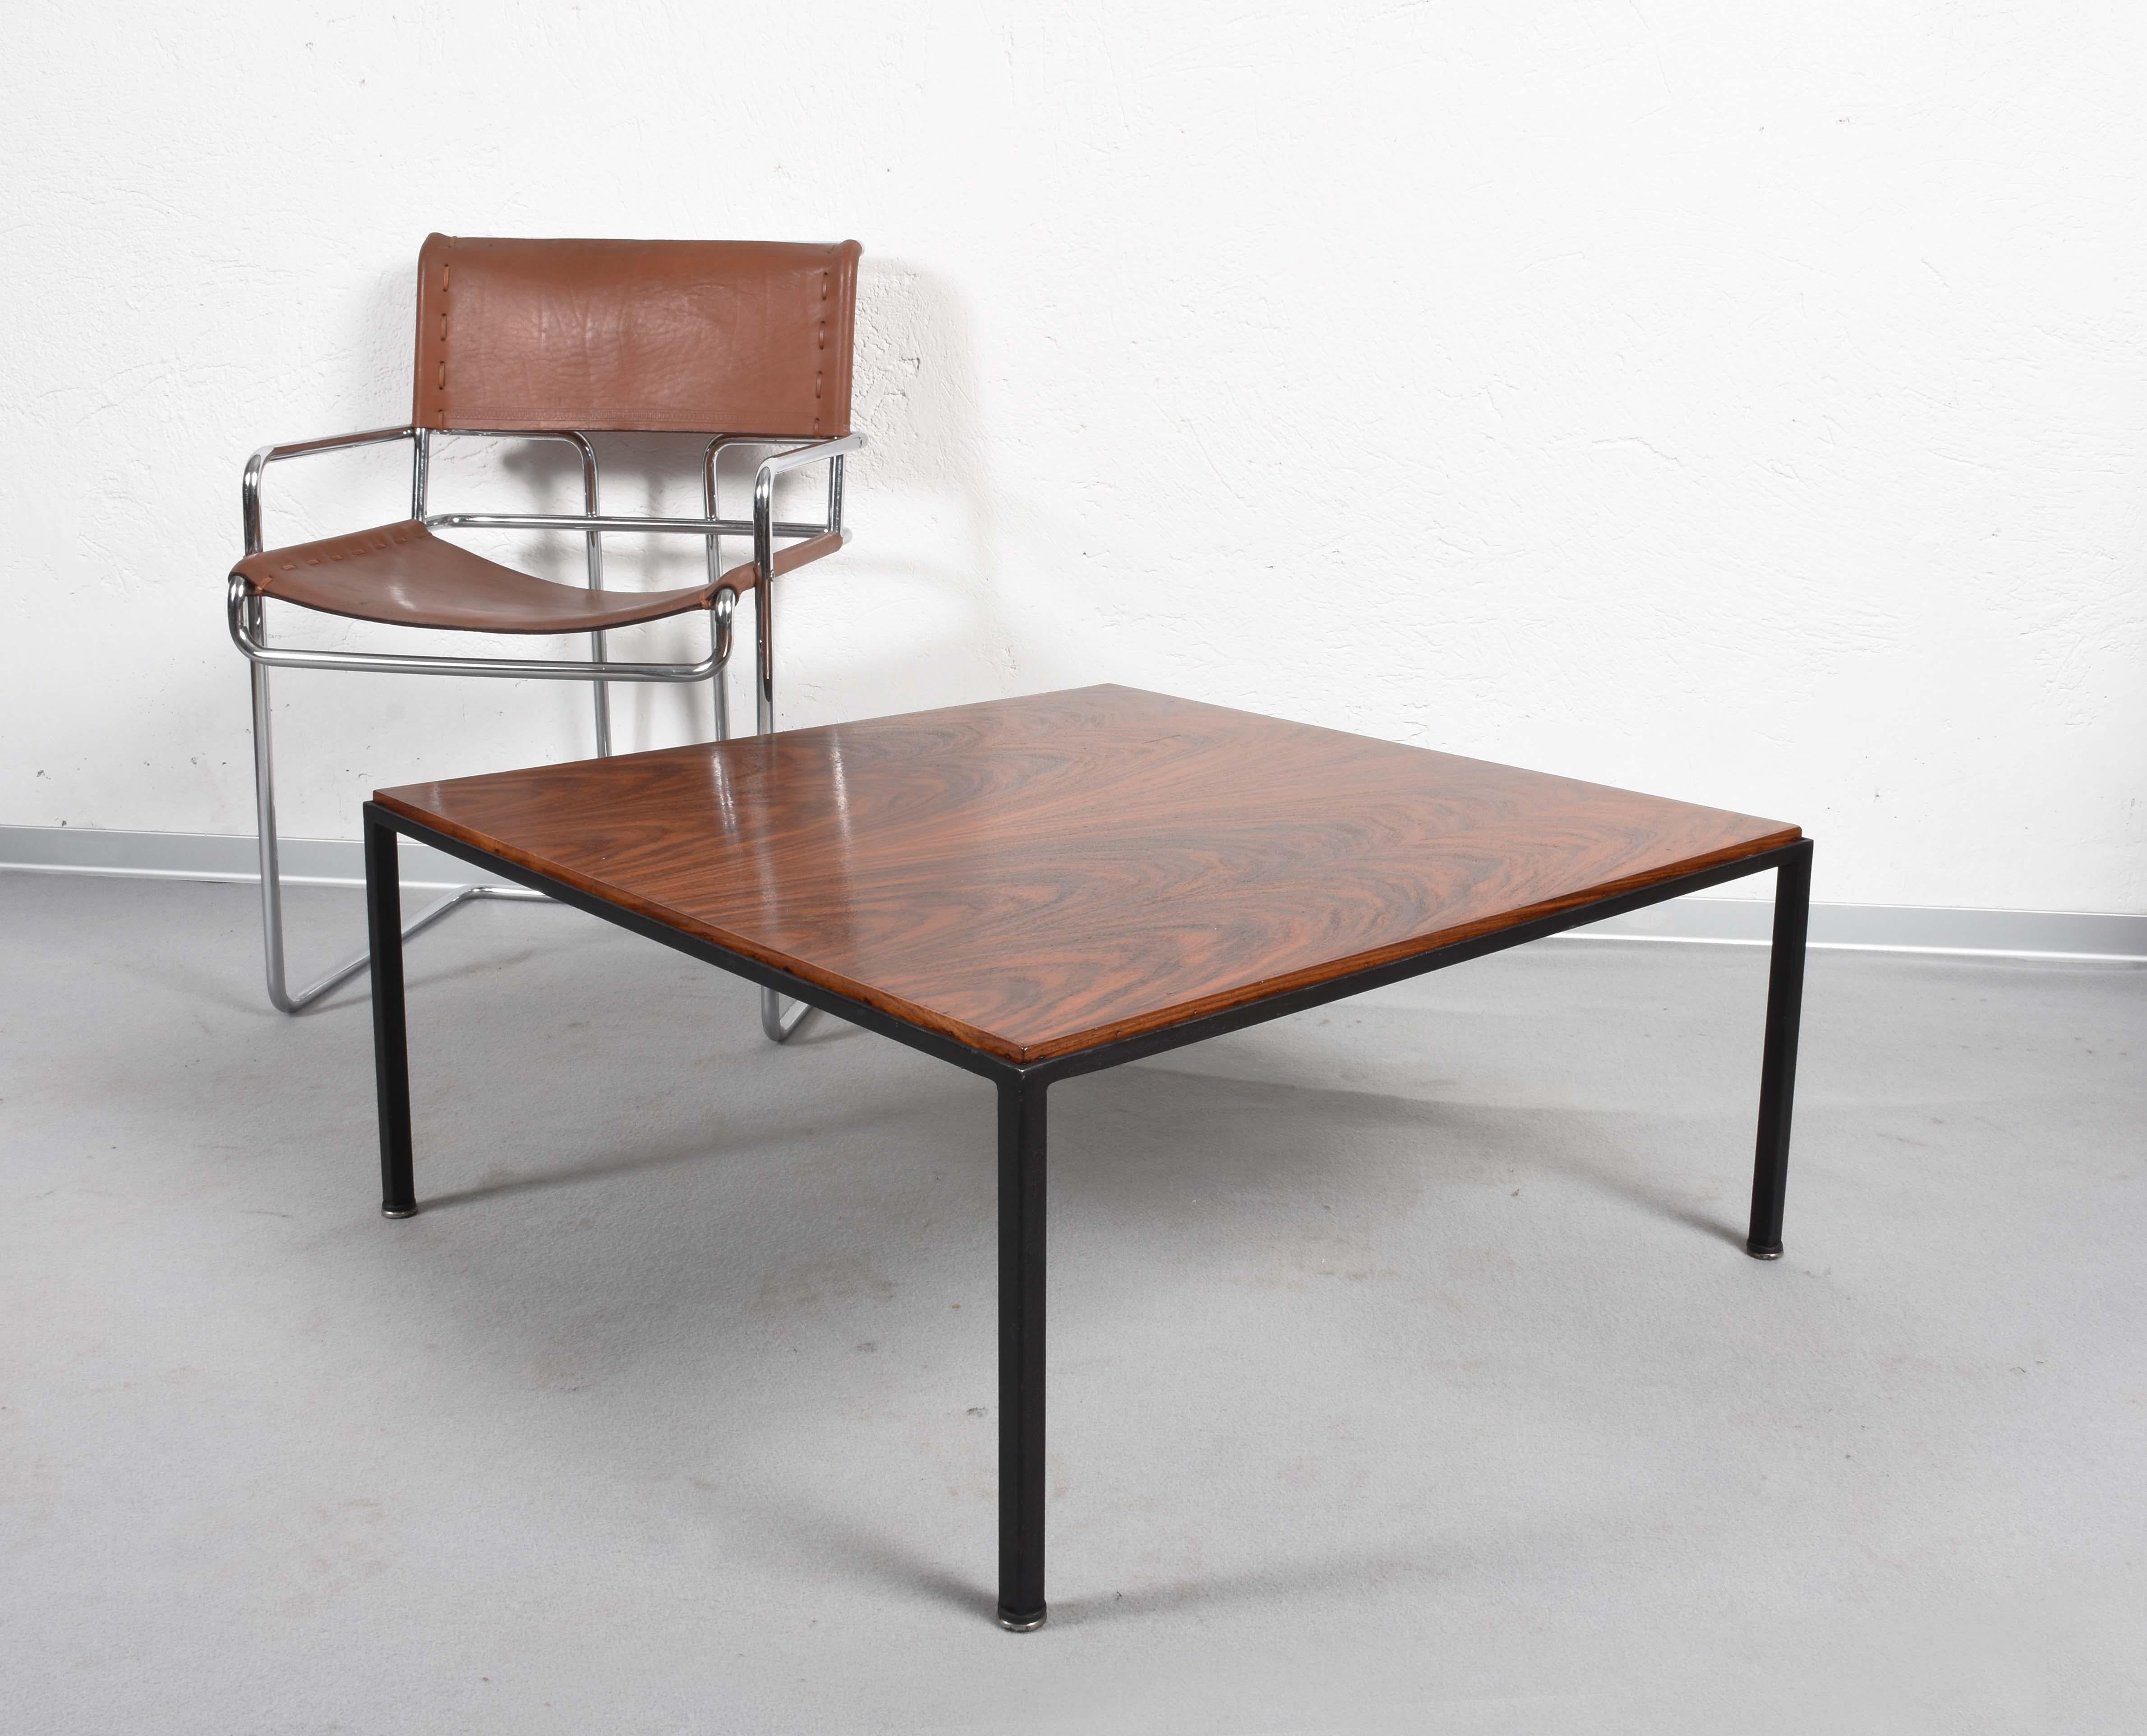 Italian Design Midcentury Wood and Iron Square Coffee Italian Table, 1960s For Sale 6